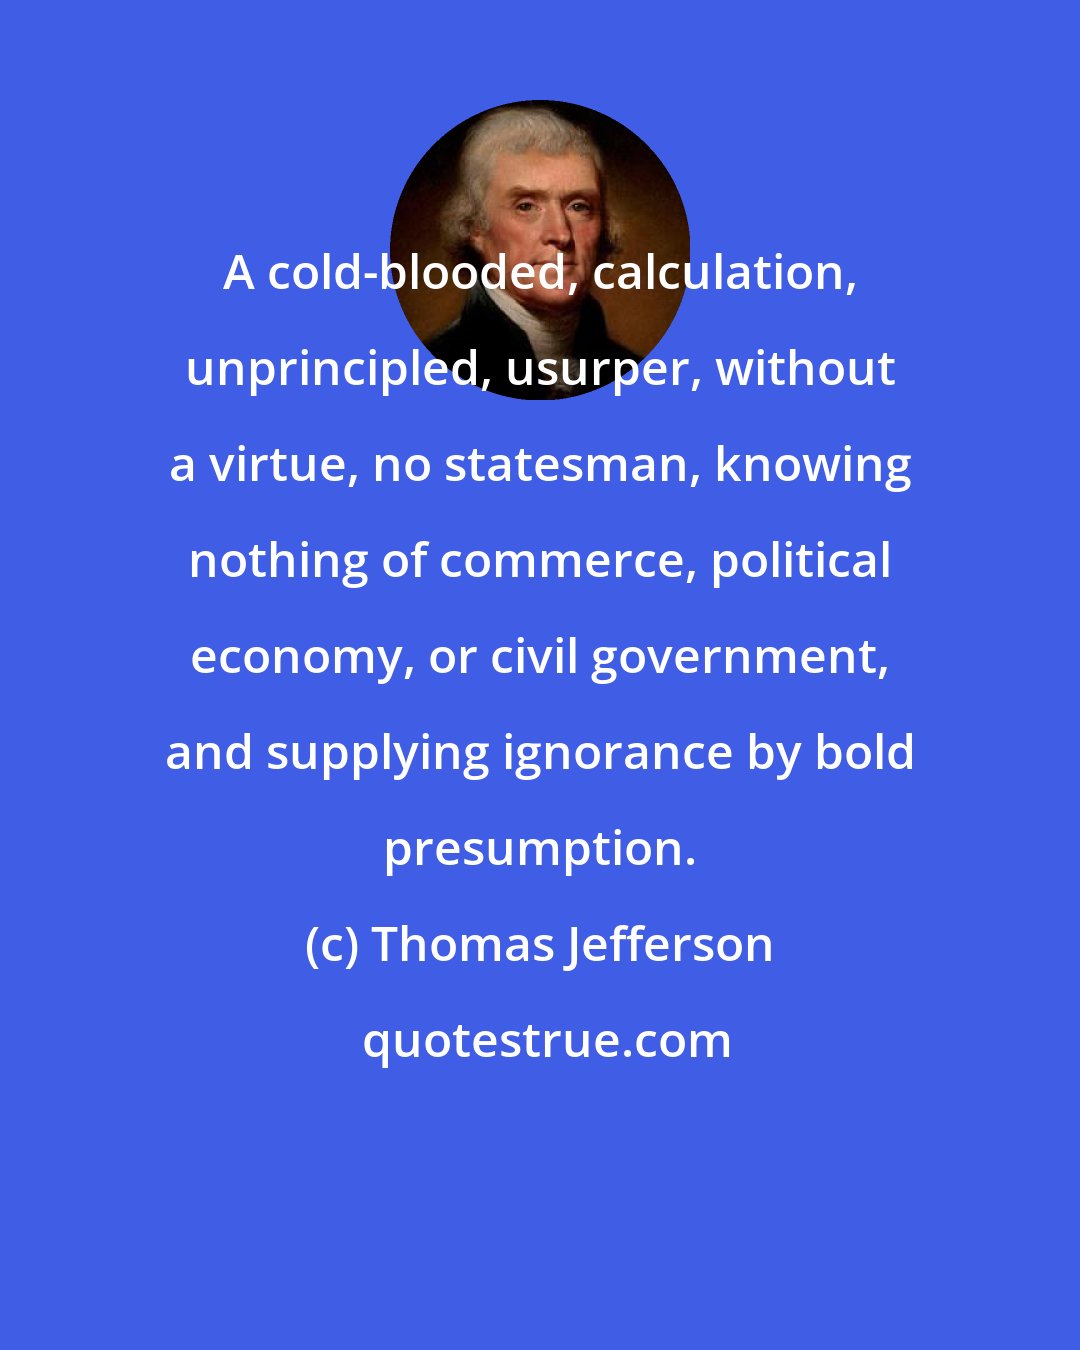 Thomas Jefferson: A cold-blooded, calculation, unprincipled, usurper, without a virtue, no statesman, knowing nothing of commerce, political economy, or civil government, and supplying ignorance by bold presumption.